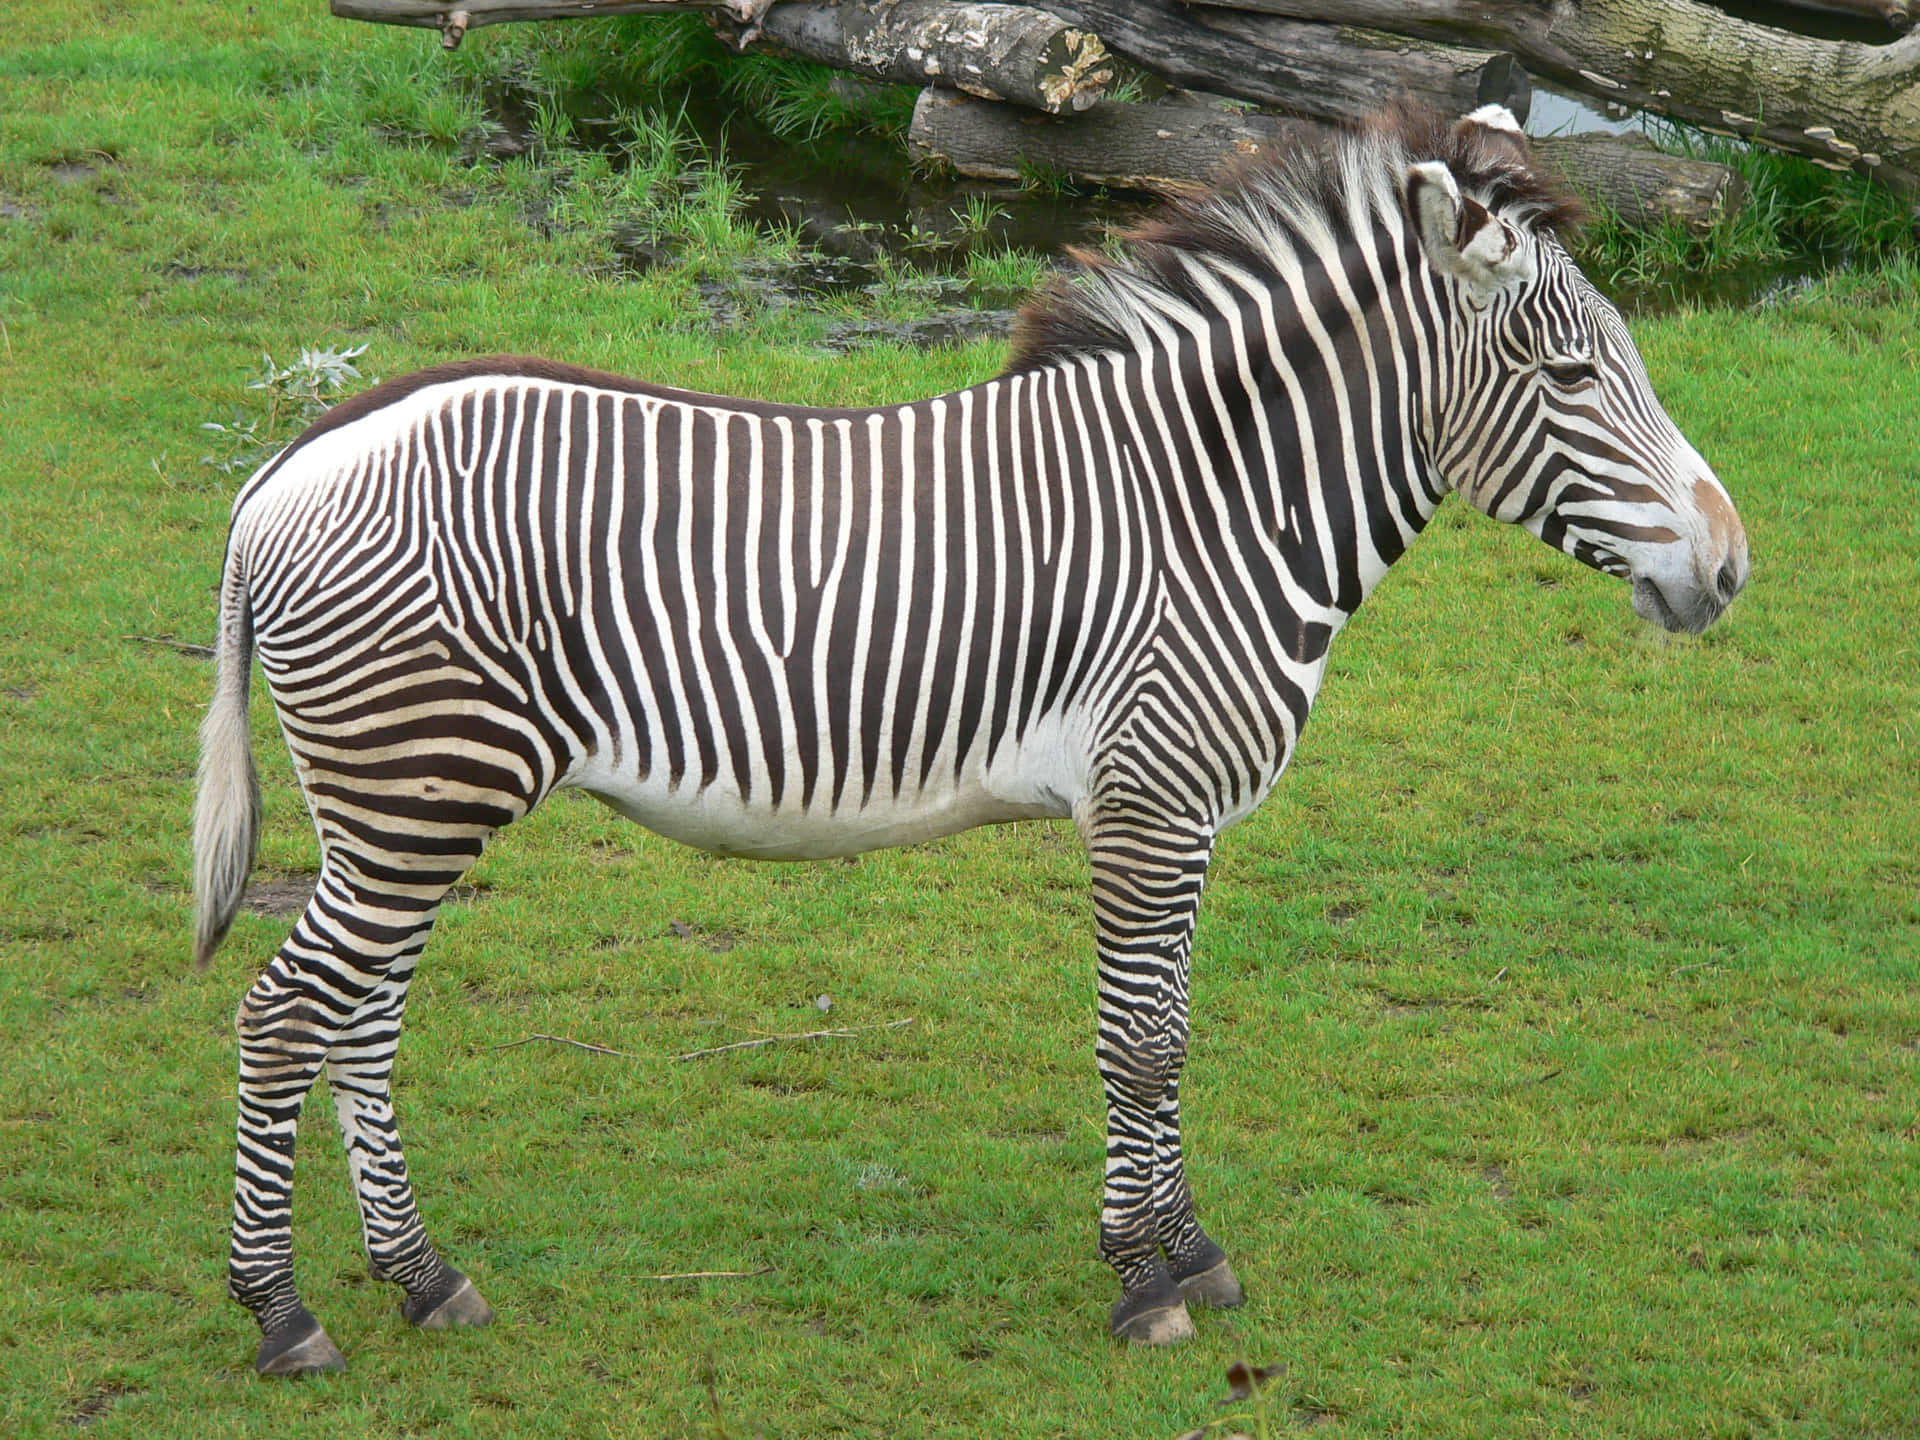 The beauty of the African Savanna - a stunning pattern of black and white seen in the Zebra.